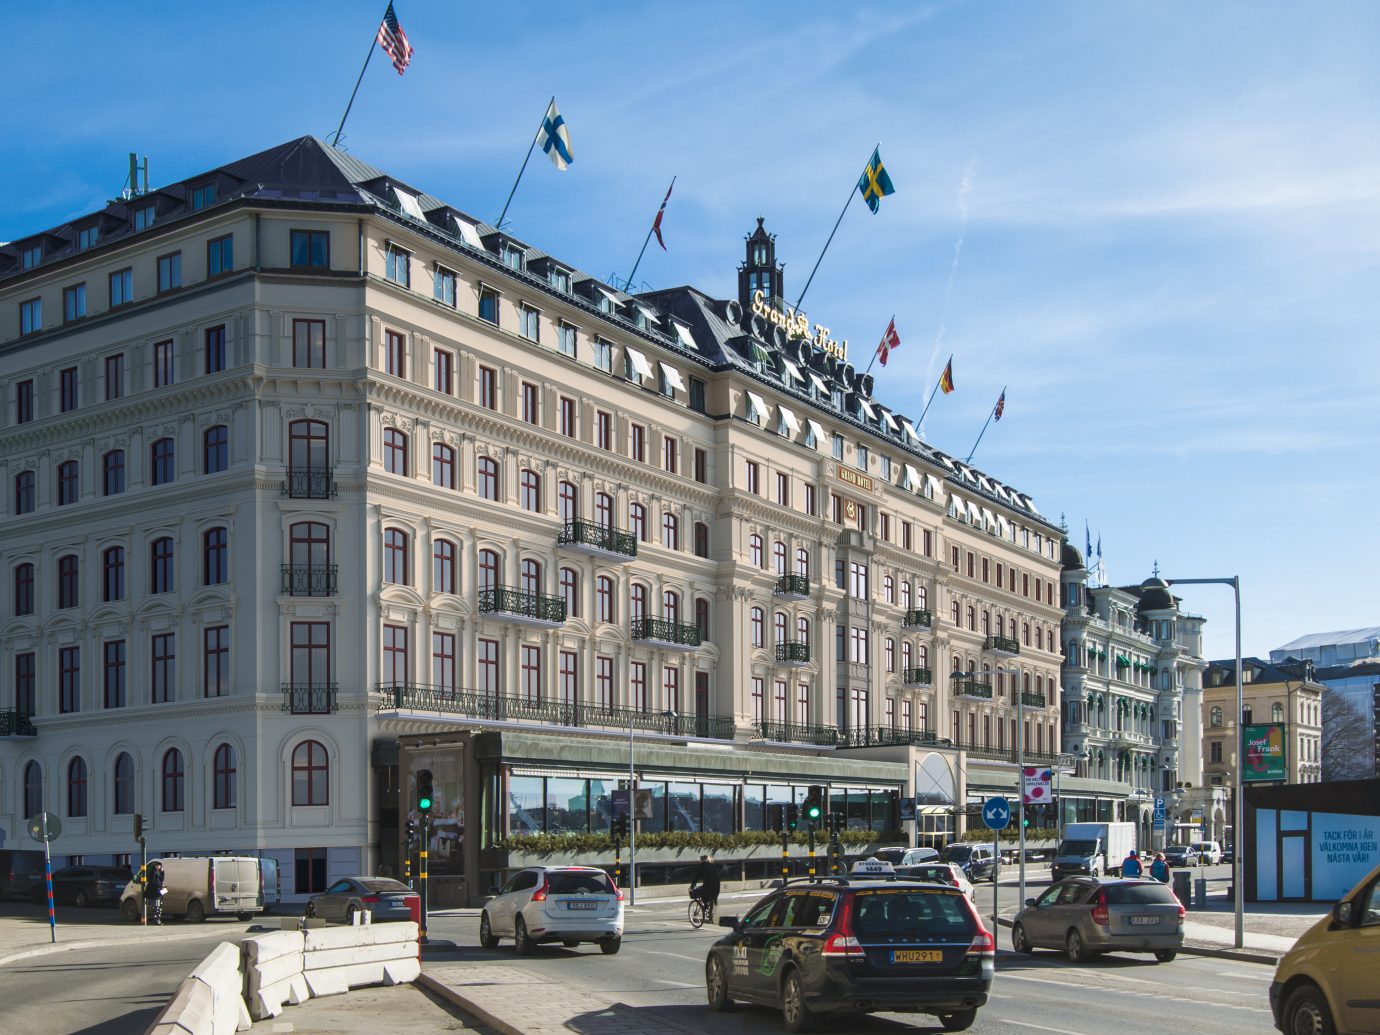 Hotels Stockholm Sweden outdoor building sky road street City landmark Town urban area metropolis metropolitan area Architecture Downtown mixed use plaza neighbourhood daytime house town square facade condominium tower block palace skyscraper classical architecture